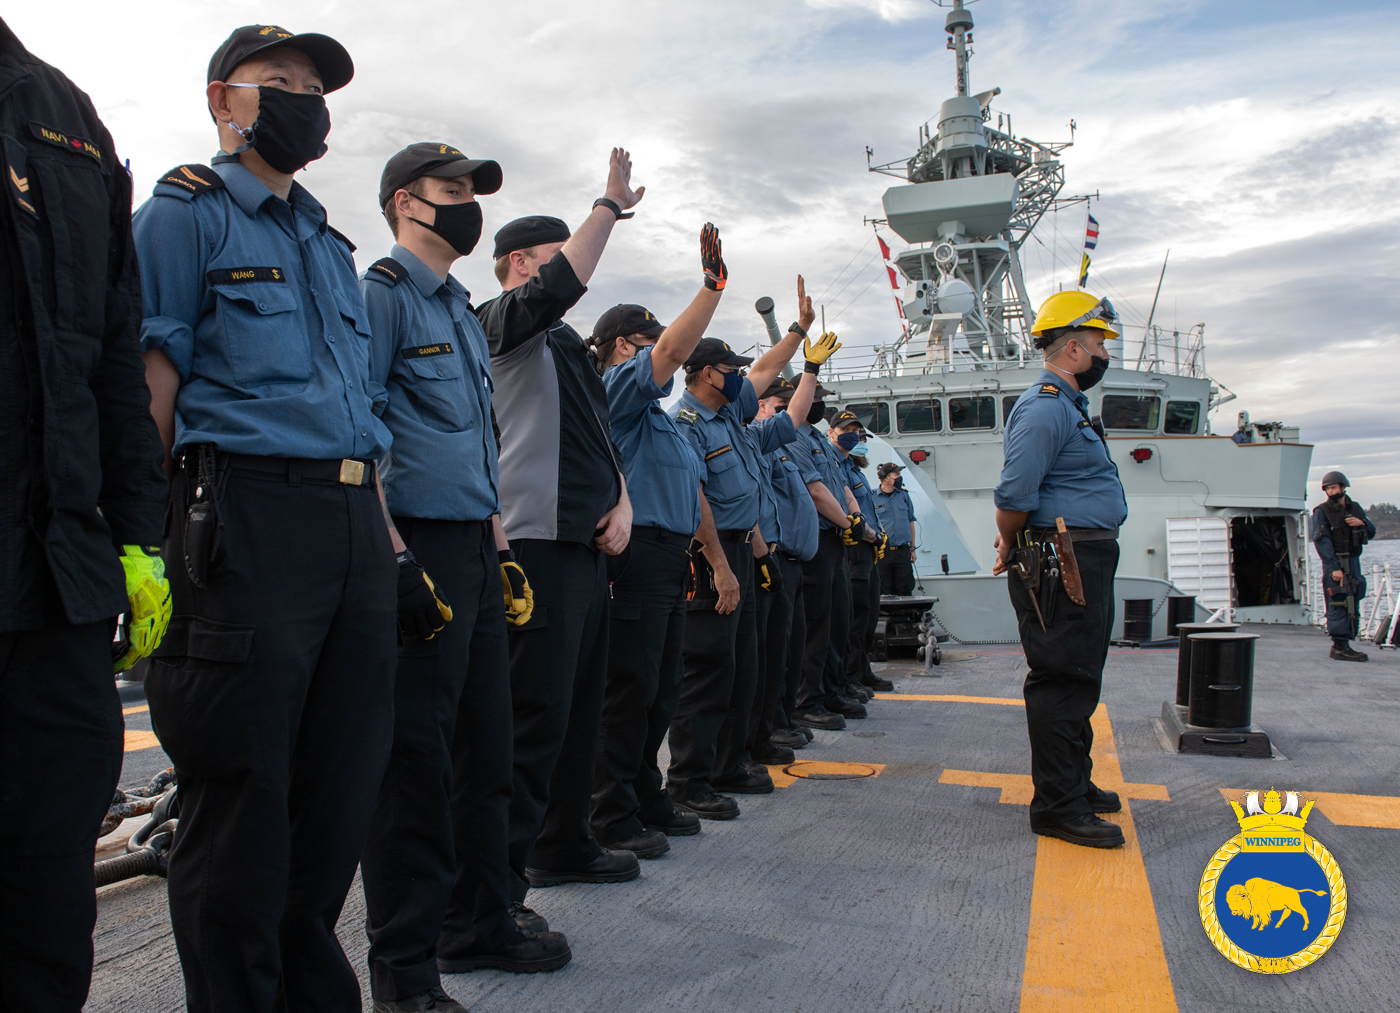 Members of HMCS Winnipeg wave goodbye as the ship departs Esquimalt Harbour Aug. 1. For the first several days at sea, sailors wore non-medical masks as a precautionary measure against COVID-19. Due to the global pandemic, Winnipeg sailors will not be exploring foreign ports during their deployment on RIMPAC and Operation Projection/Neon, which will see the ship return in December 2020. Photo by Leading Seaman Valerie LeClair, MARPAC Imaging Services